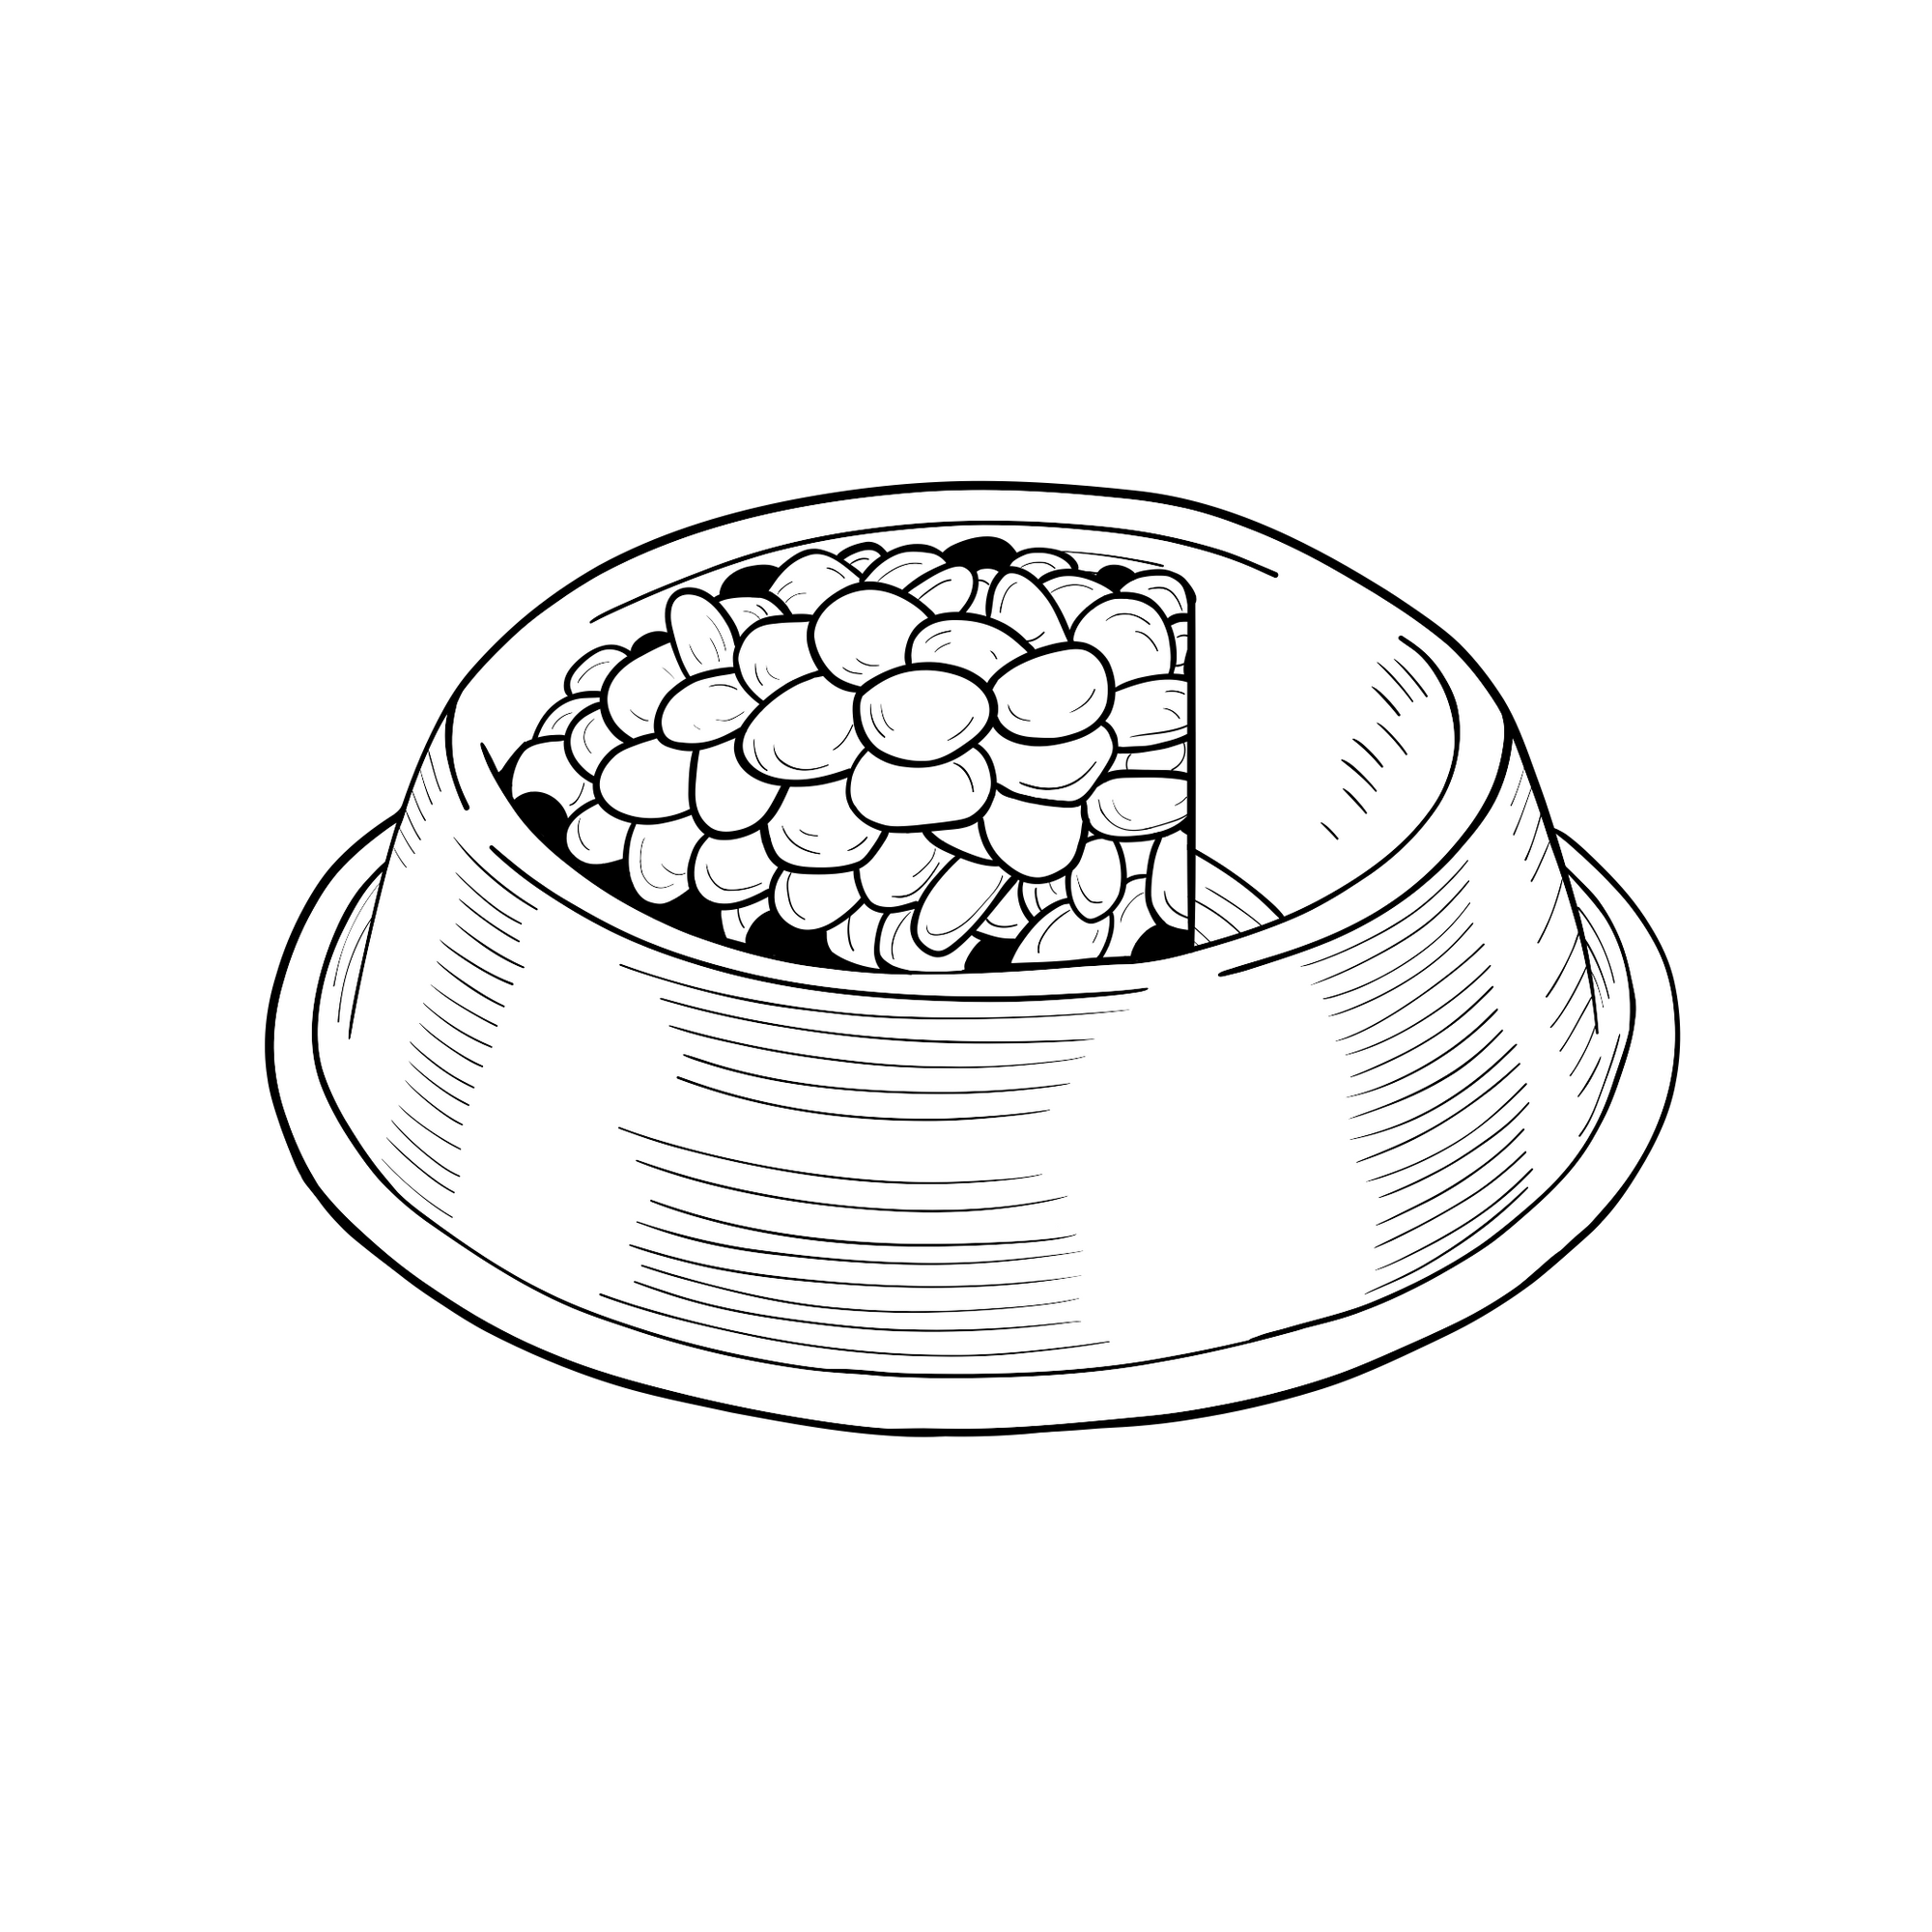 Line drawing of a bowl of food, filled 3/4 of the way with kibble.